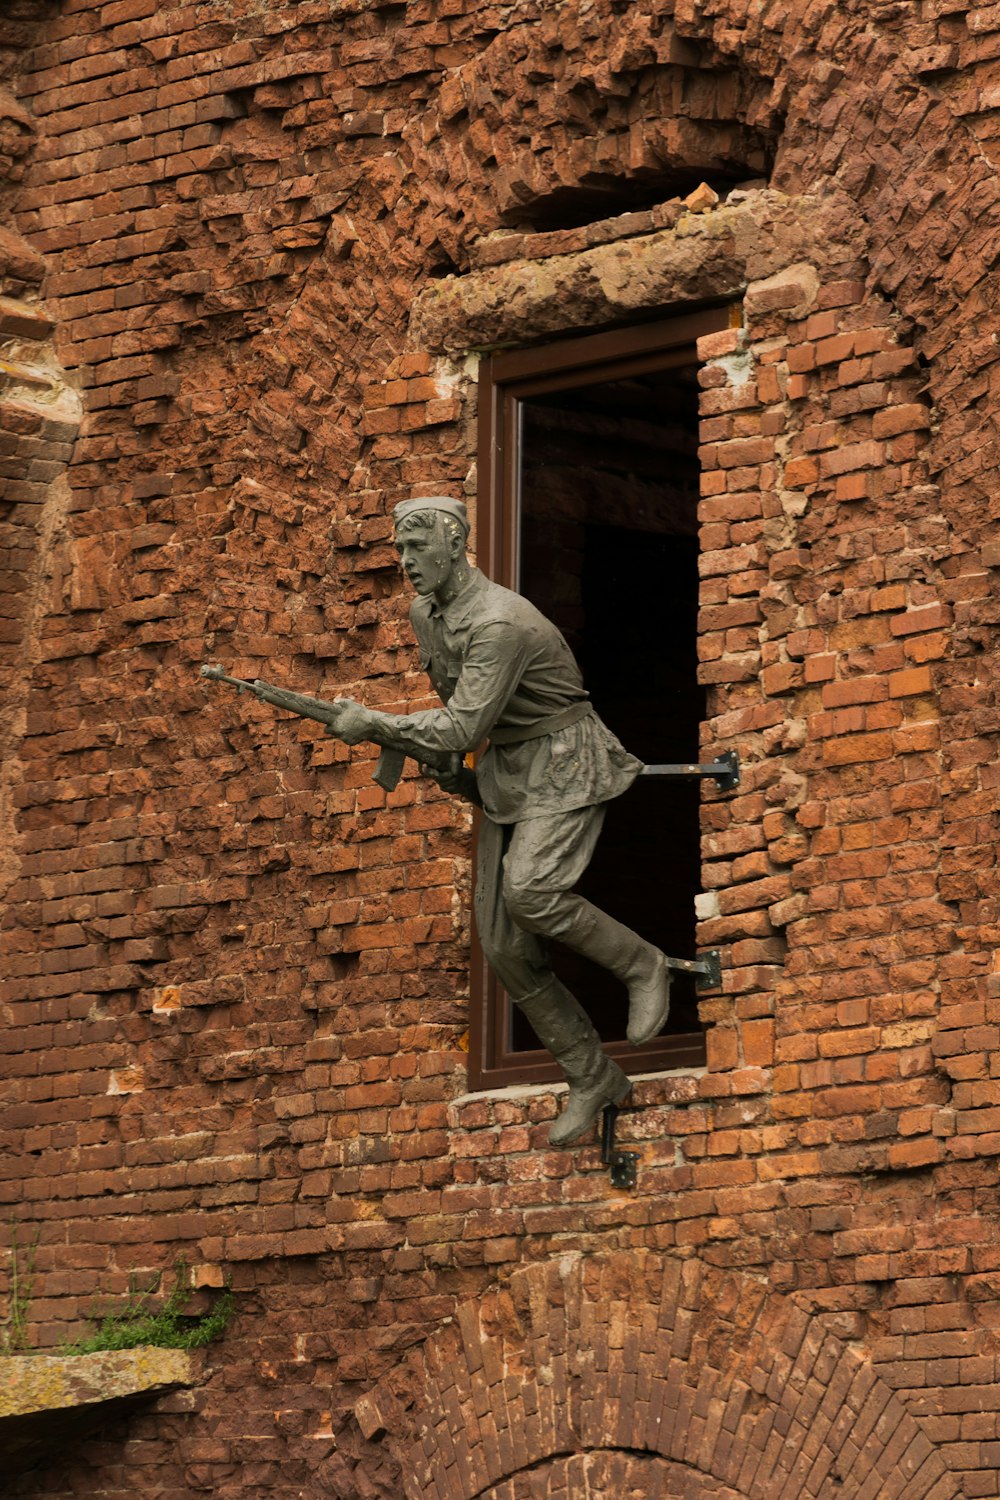 a statue of a person holding a gun in a brick building